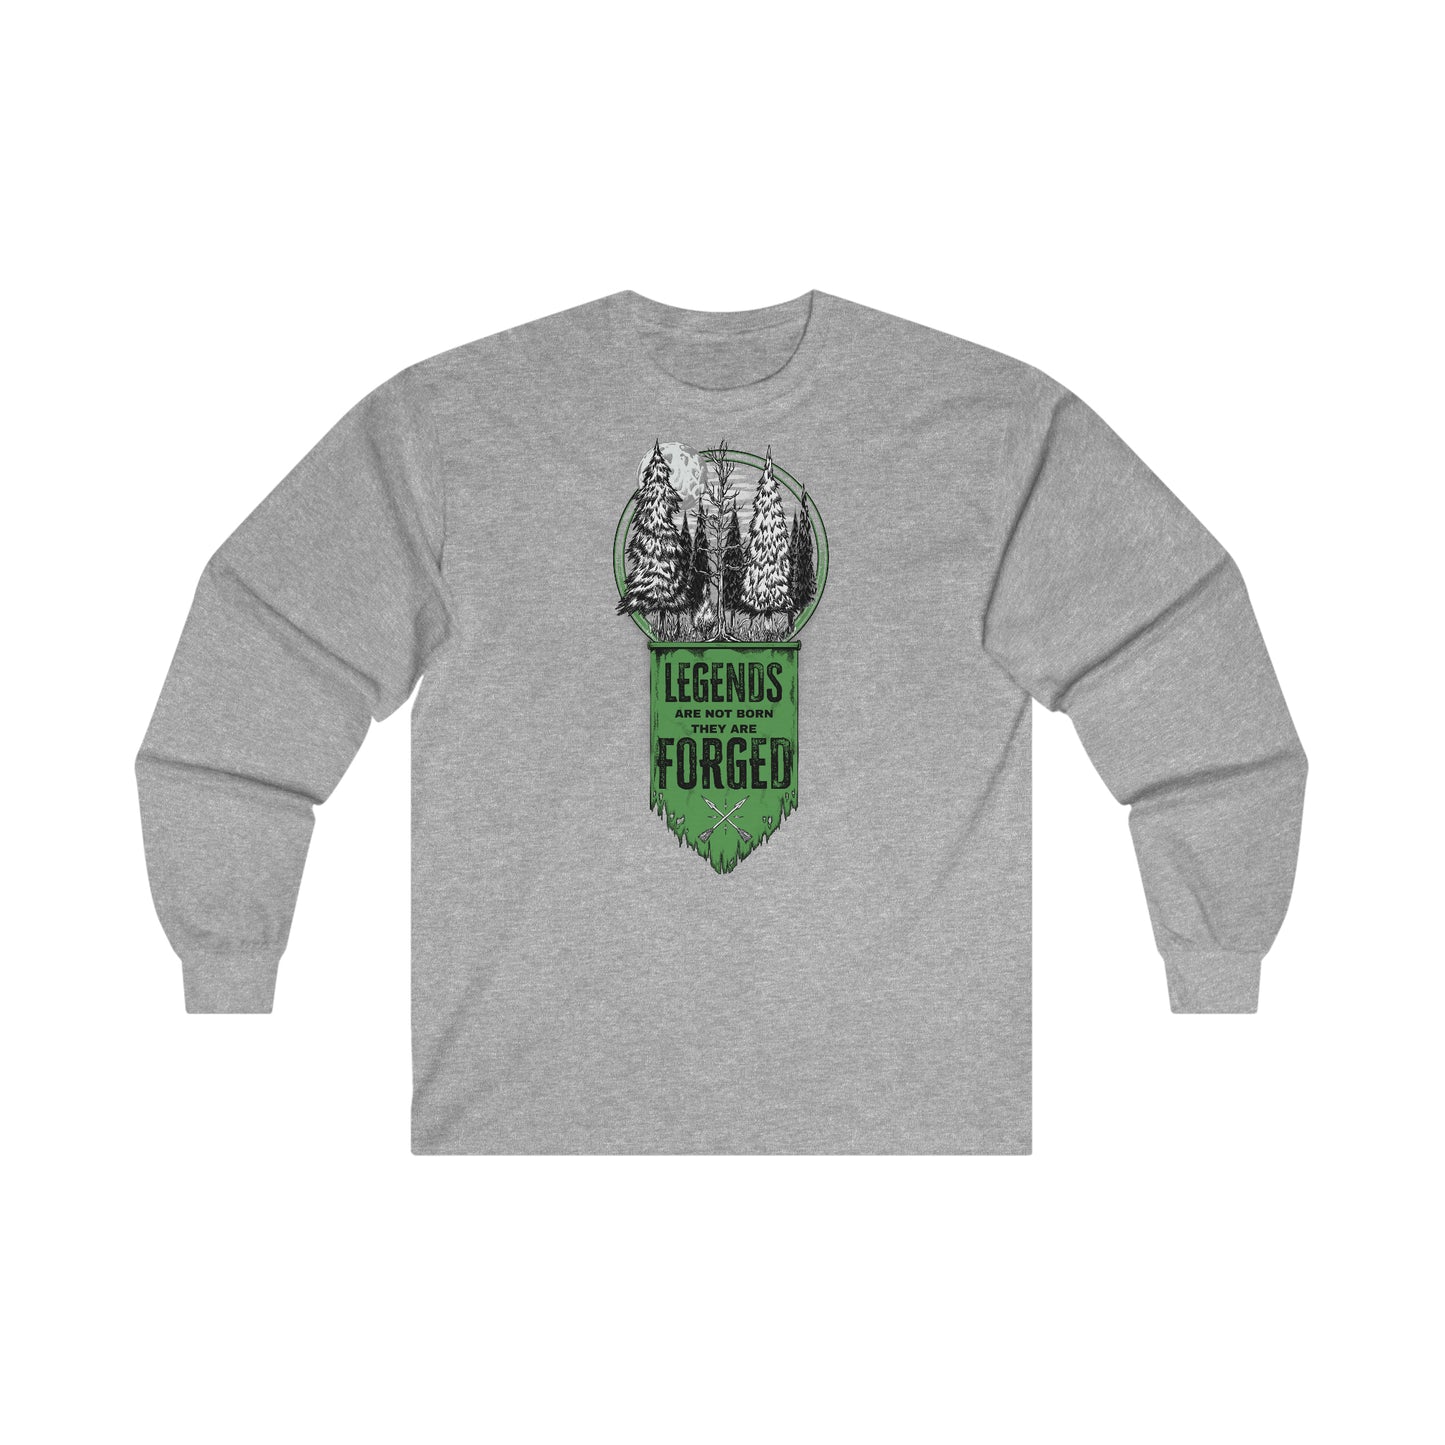 Legends 'A Forest Of Vanity And Valour' Ultra Cotton Long Sleeve Tee